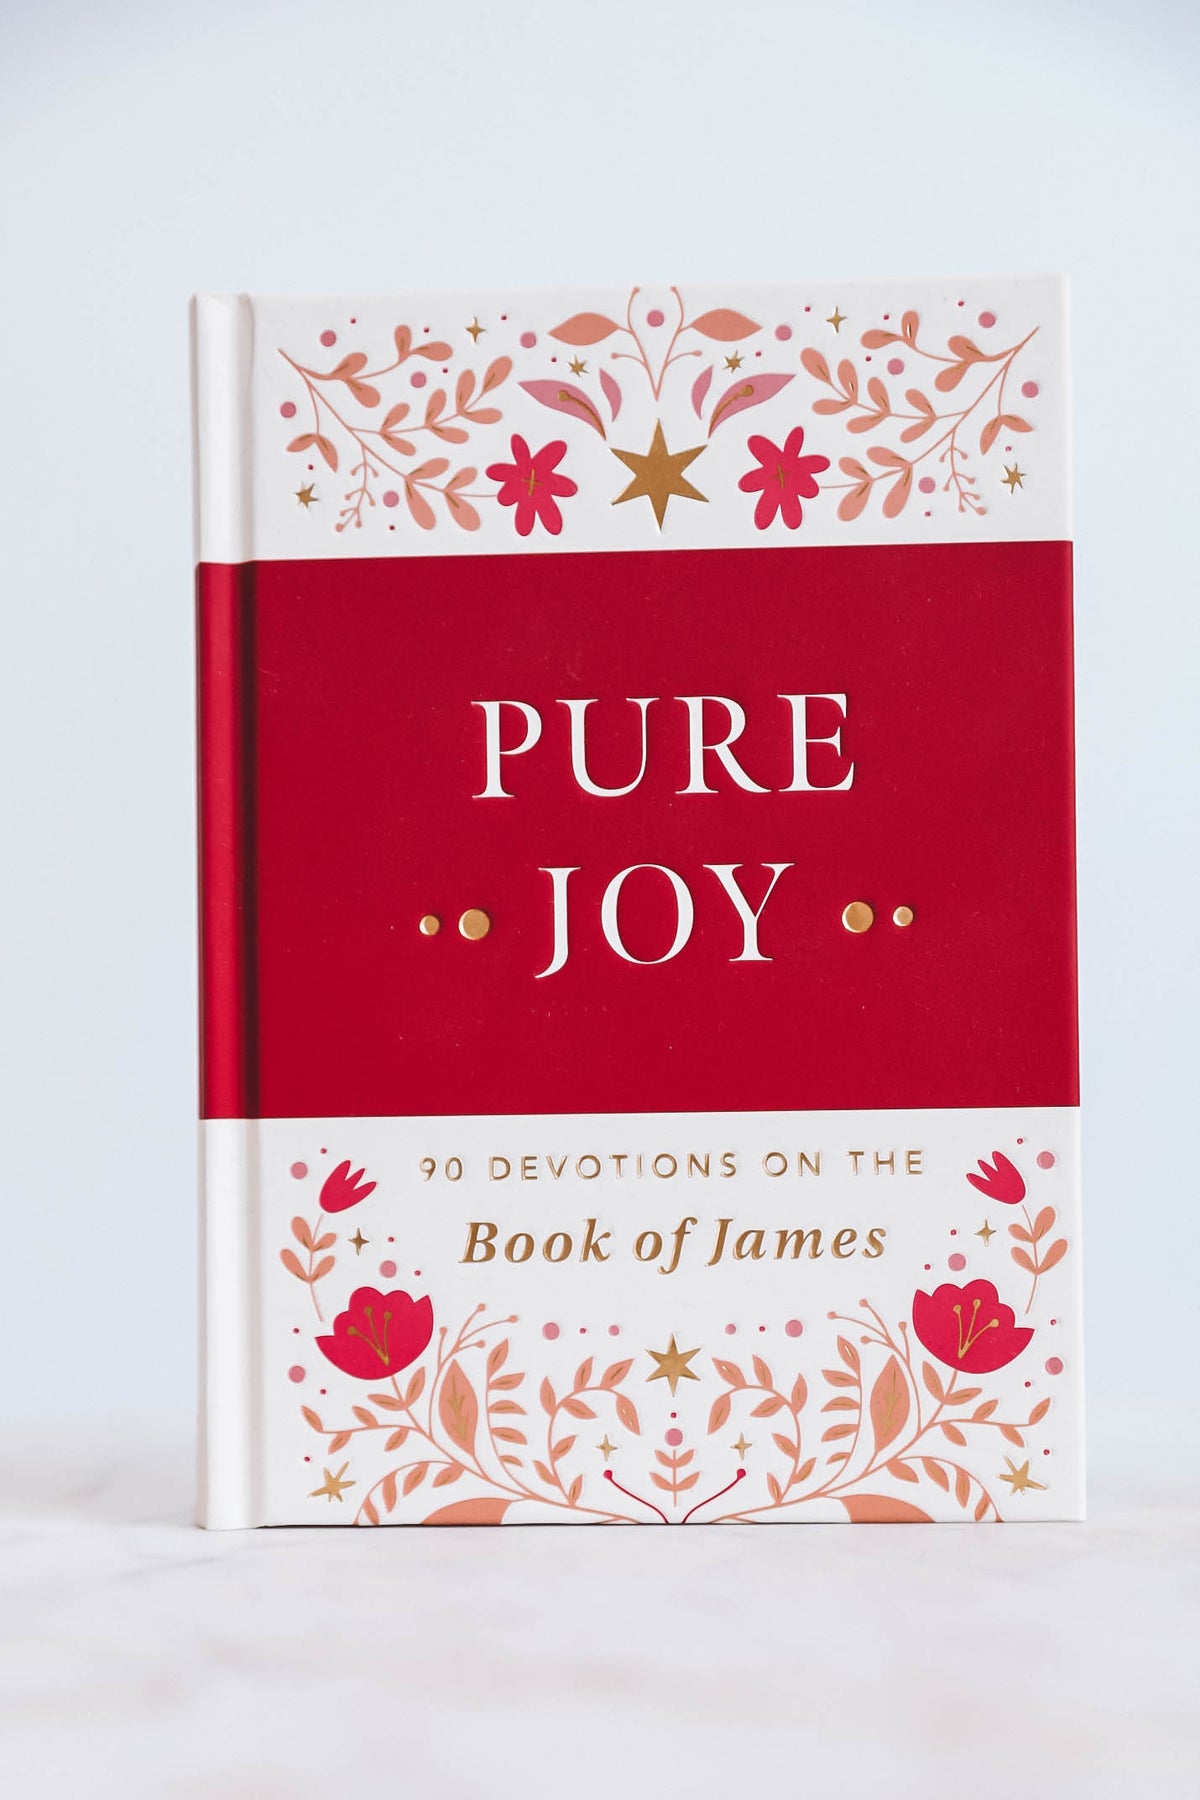 Pure Joy: A 90 Day Devotional in the Book of James